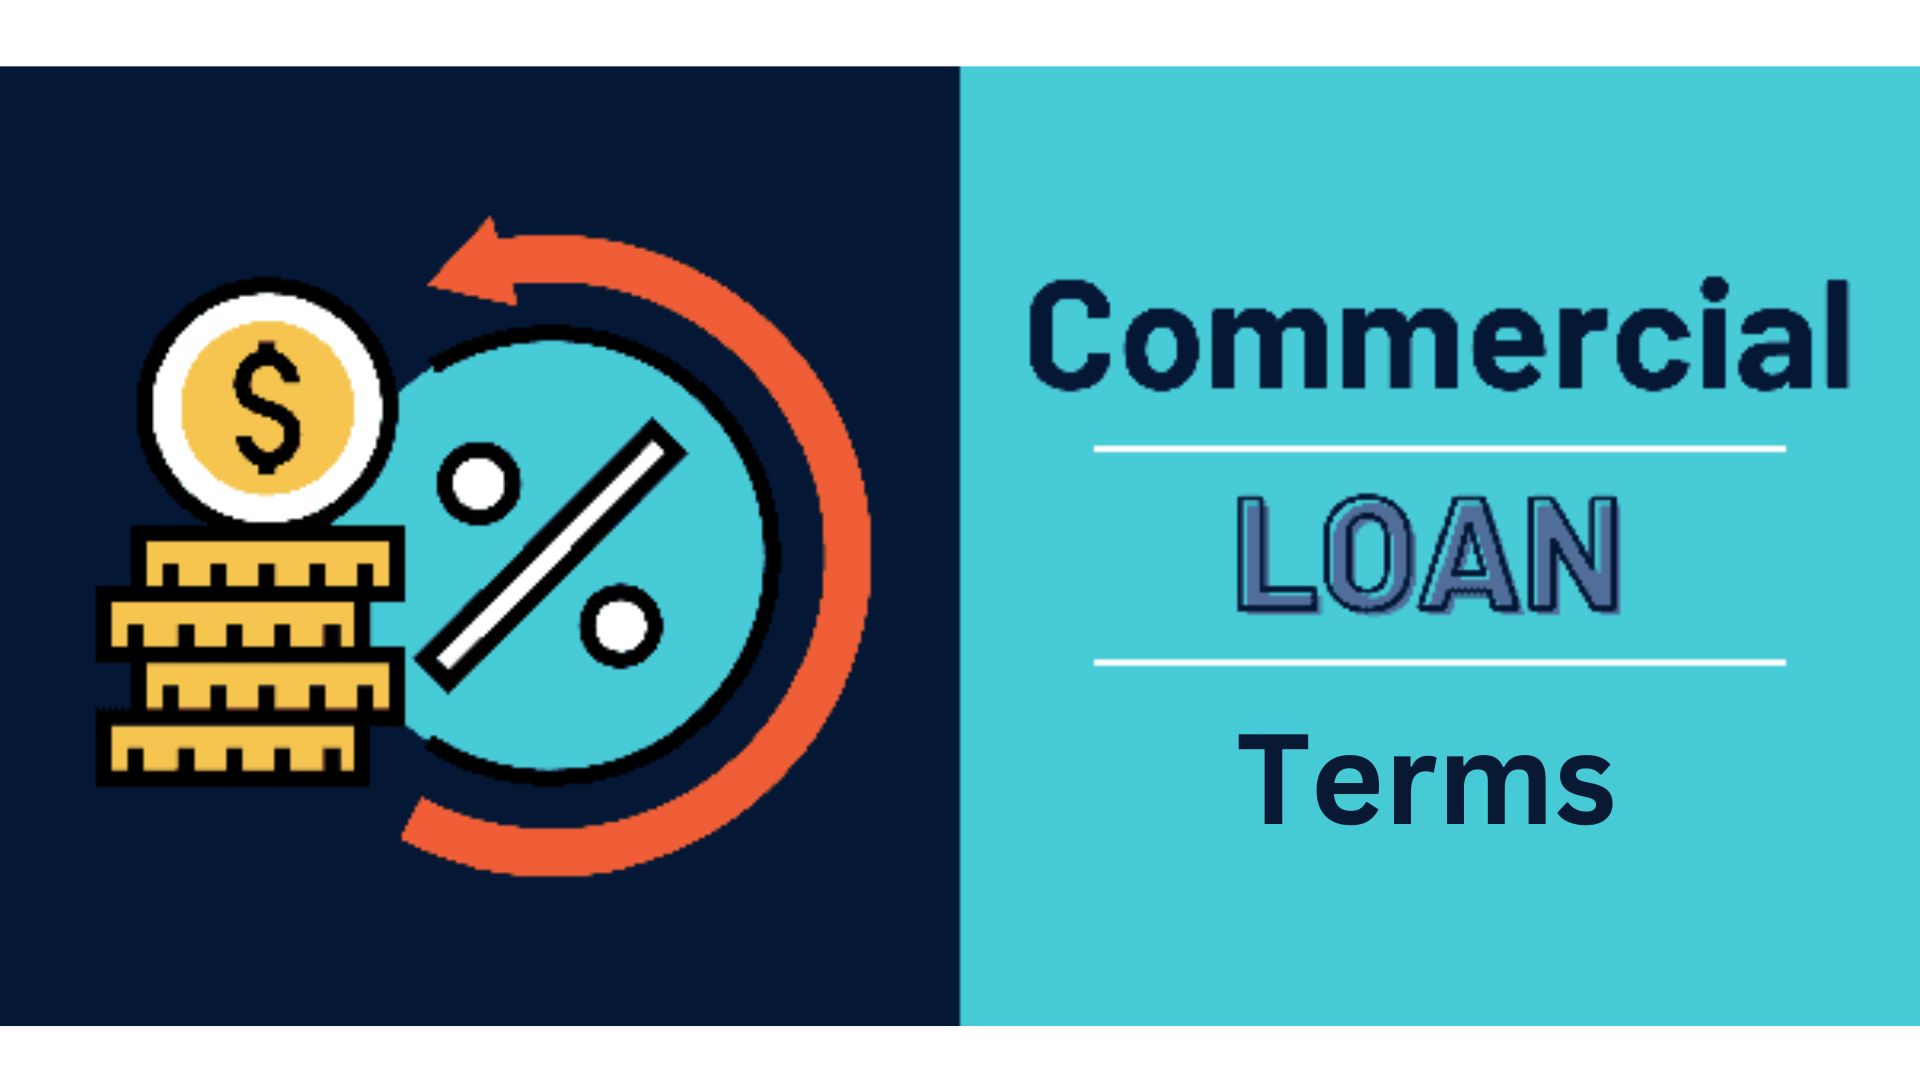 Commercial Loan Terms